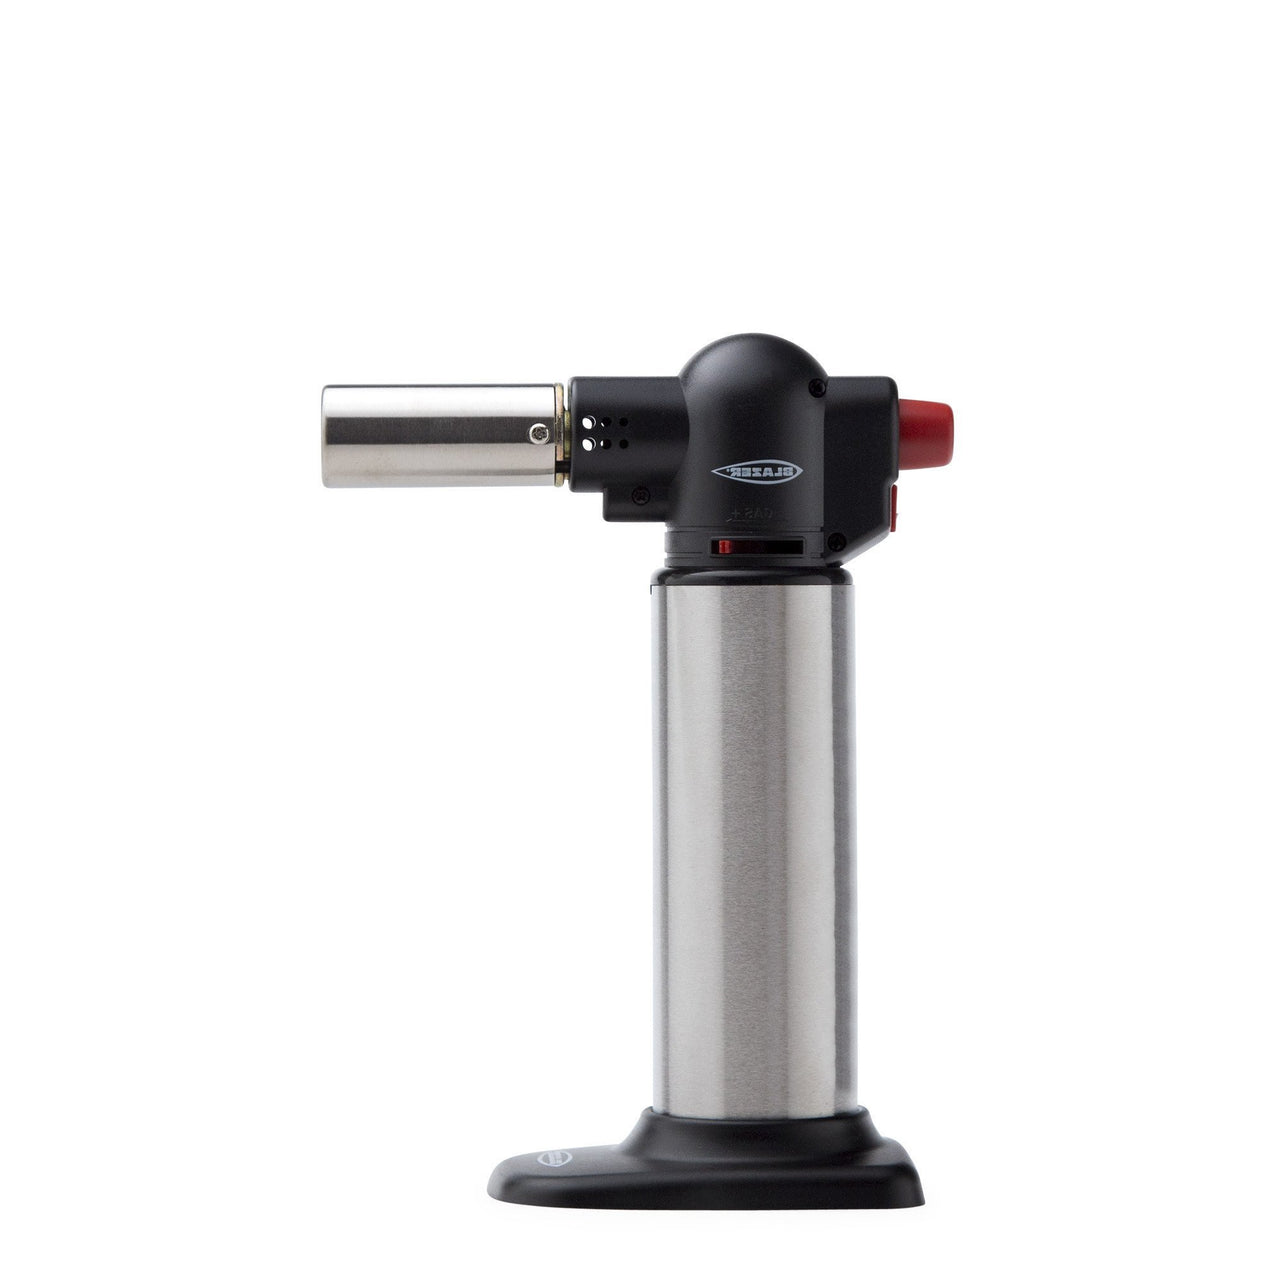 Blazer Big Buddy Butane Torch - Stainless Steel - 420 Science - The most trusted online smoke shop.